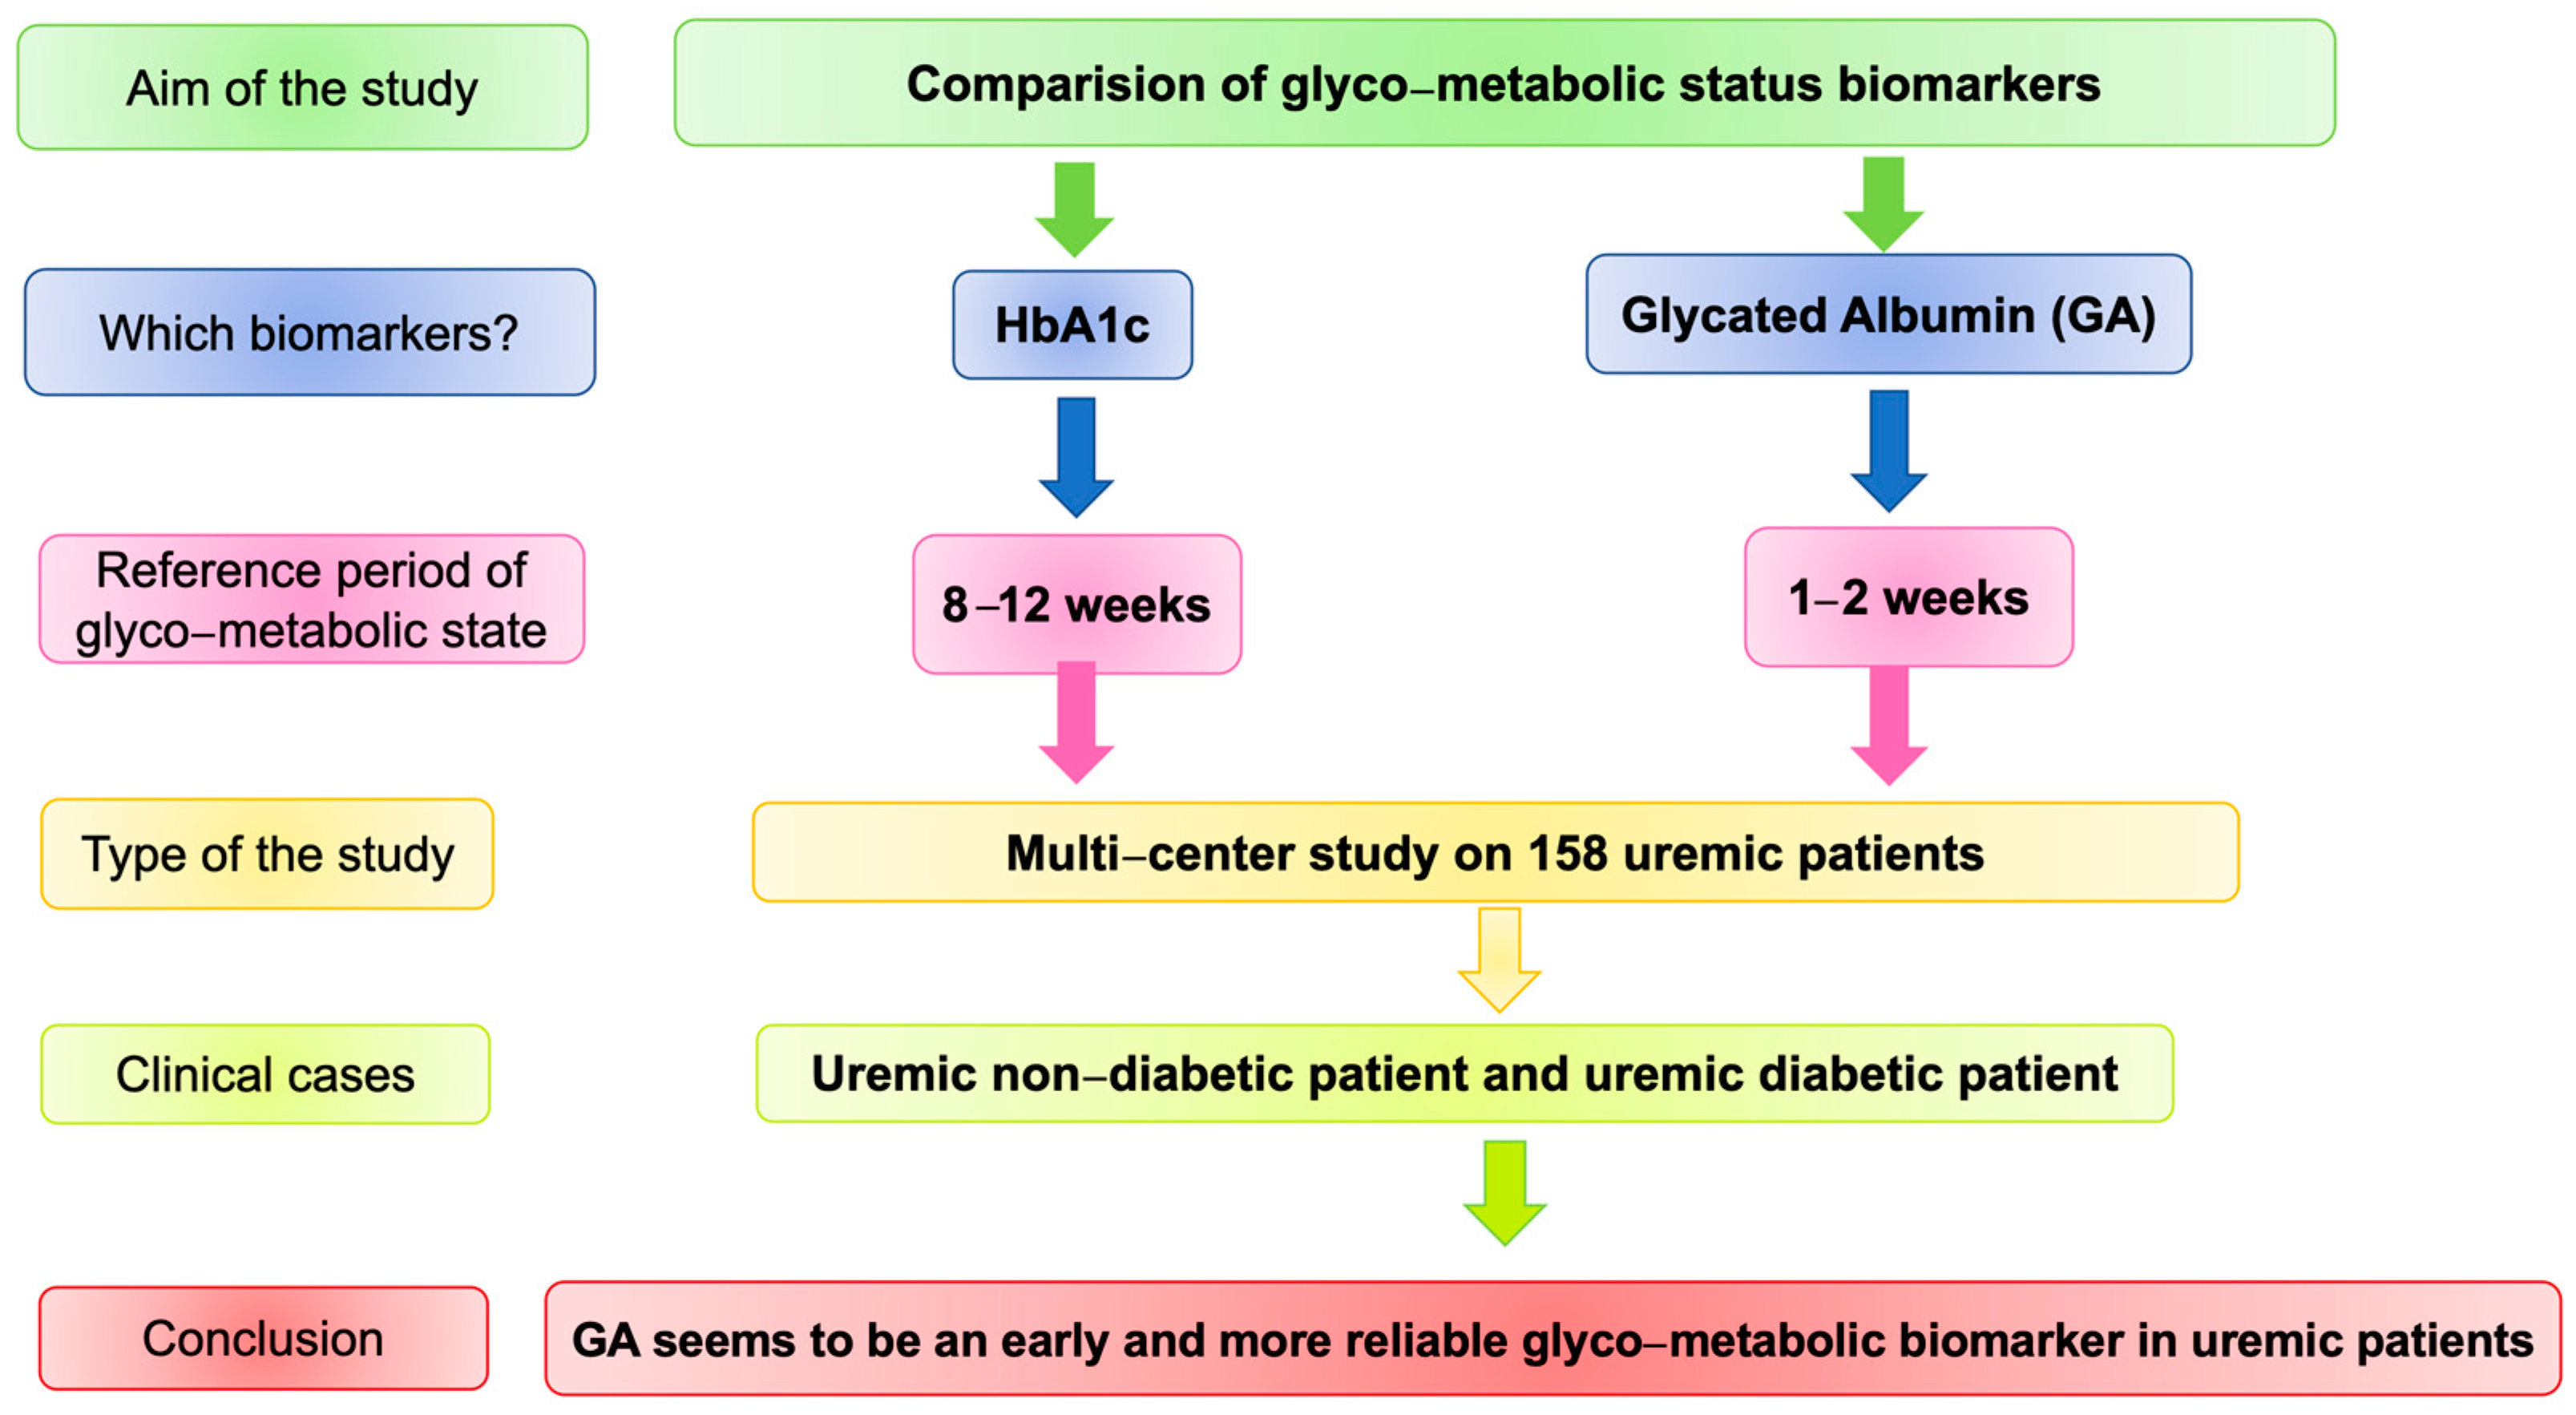 diabetes obesity and metabolism journal abbreviation)